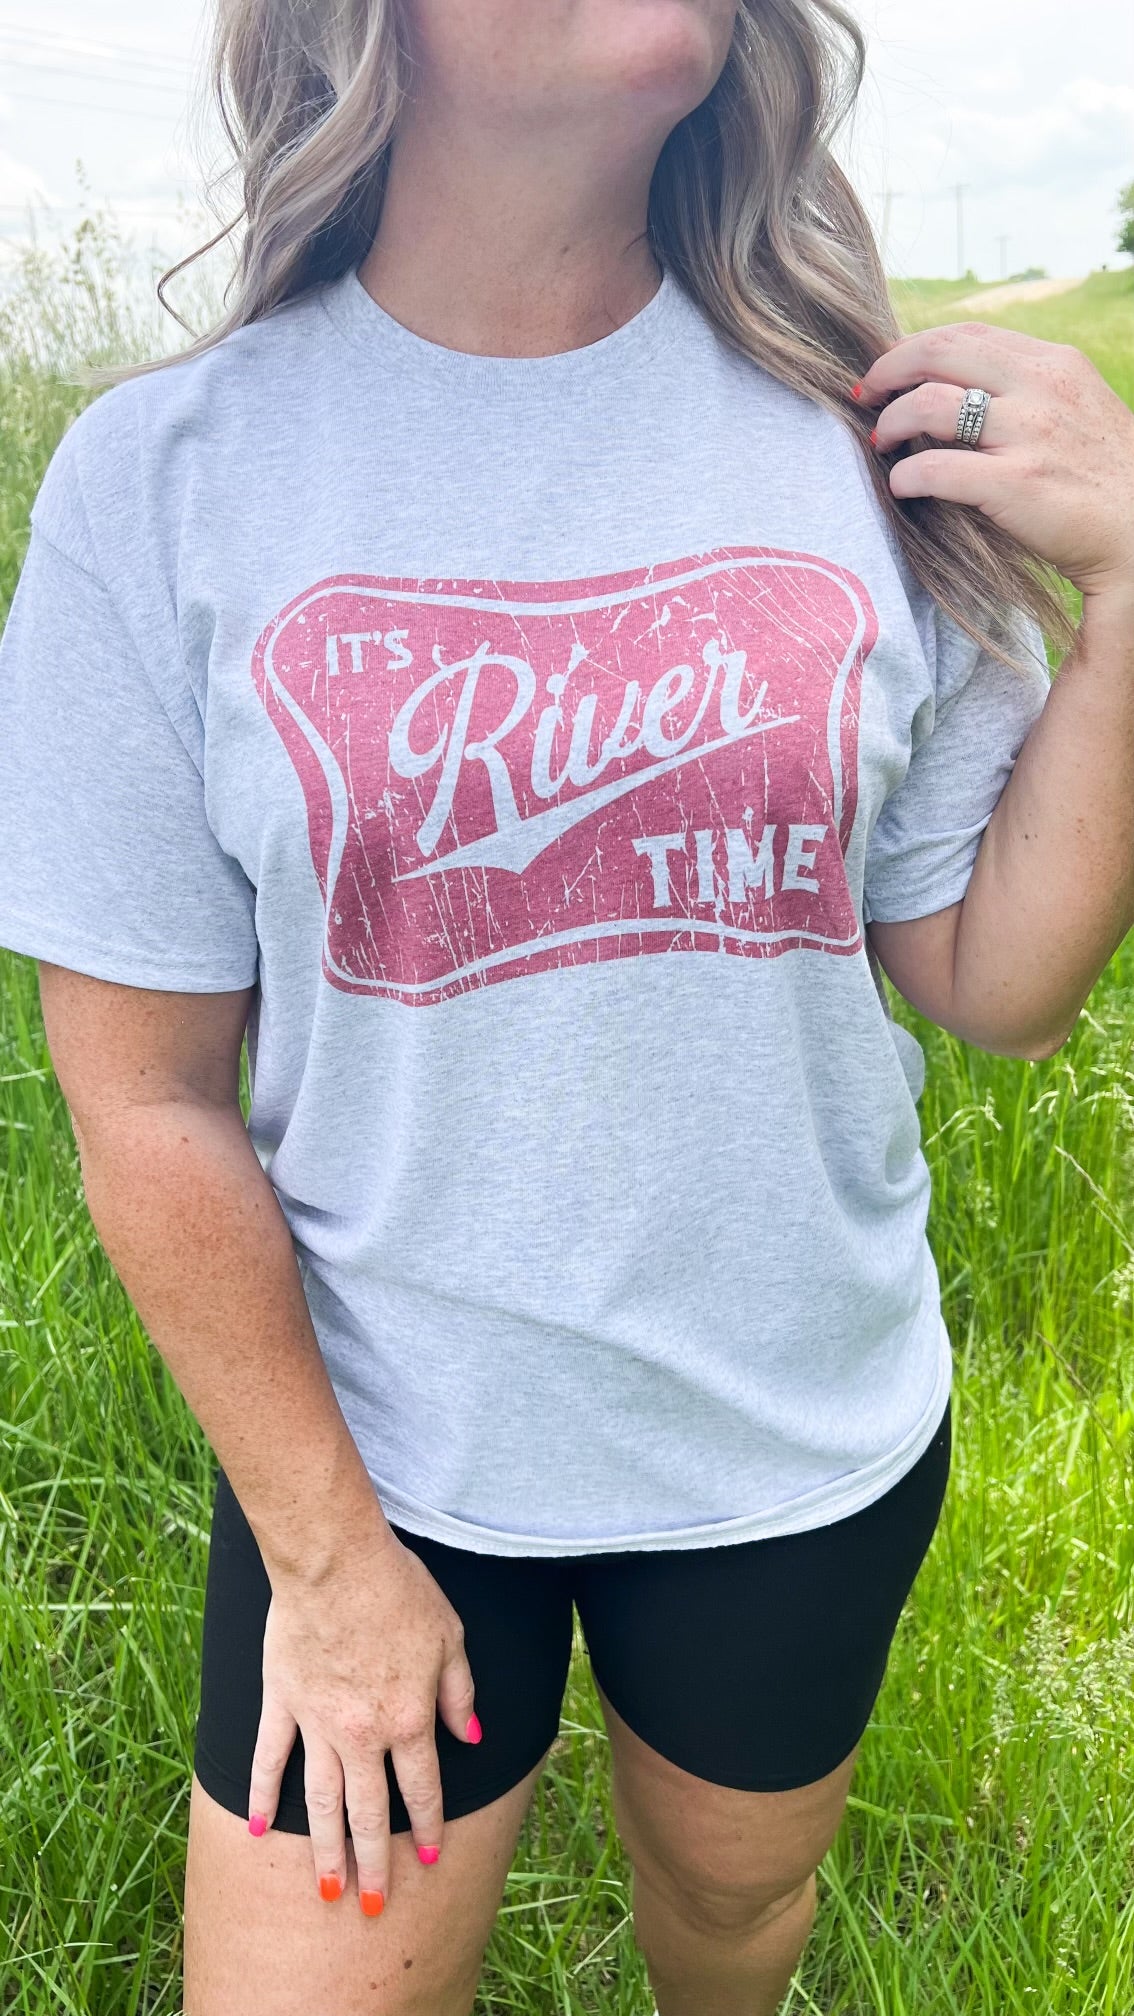 It’s River Time Graphic